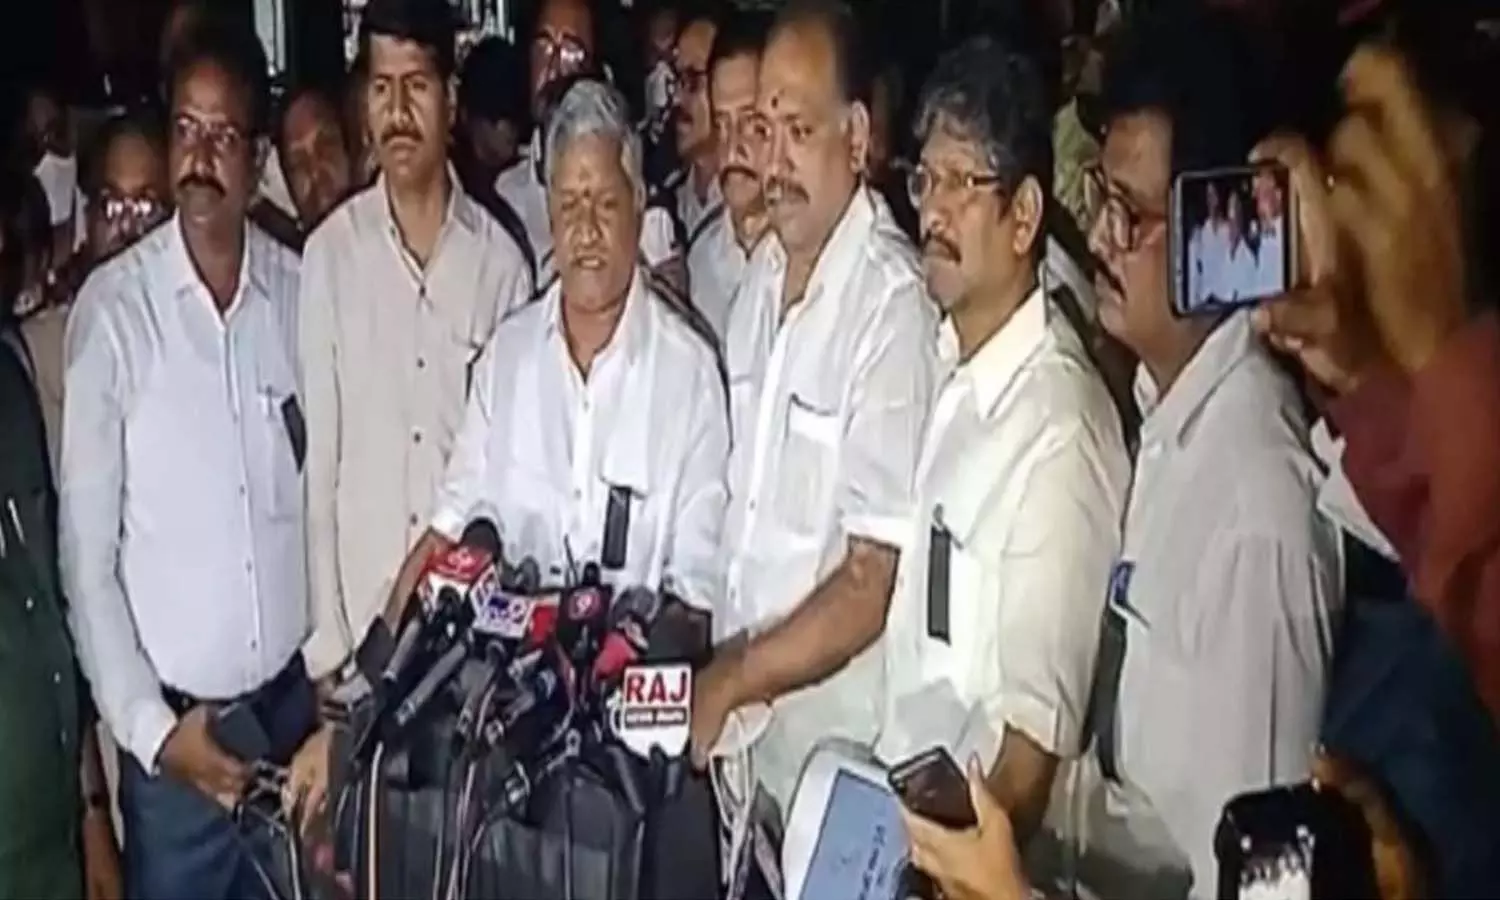 employees unions, ministers committee, talks, fail, andhra pradesh